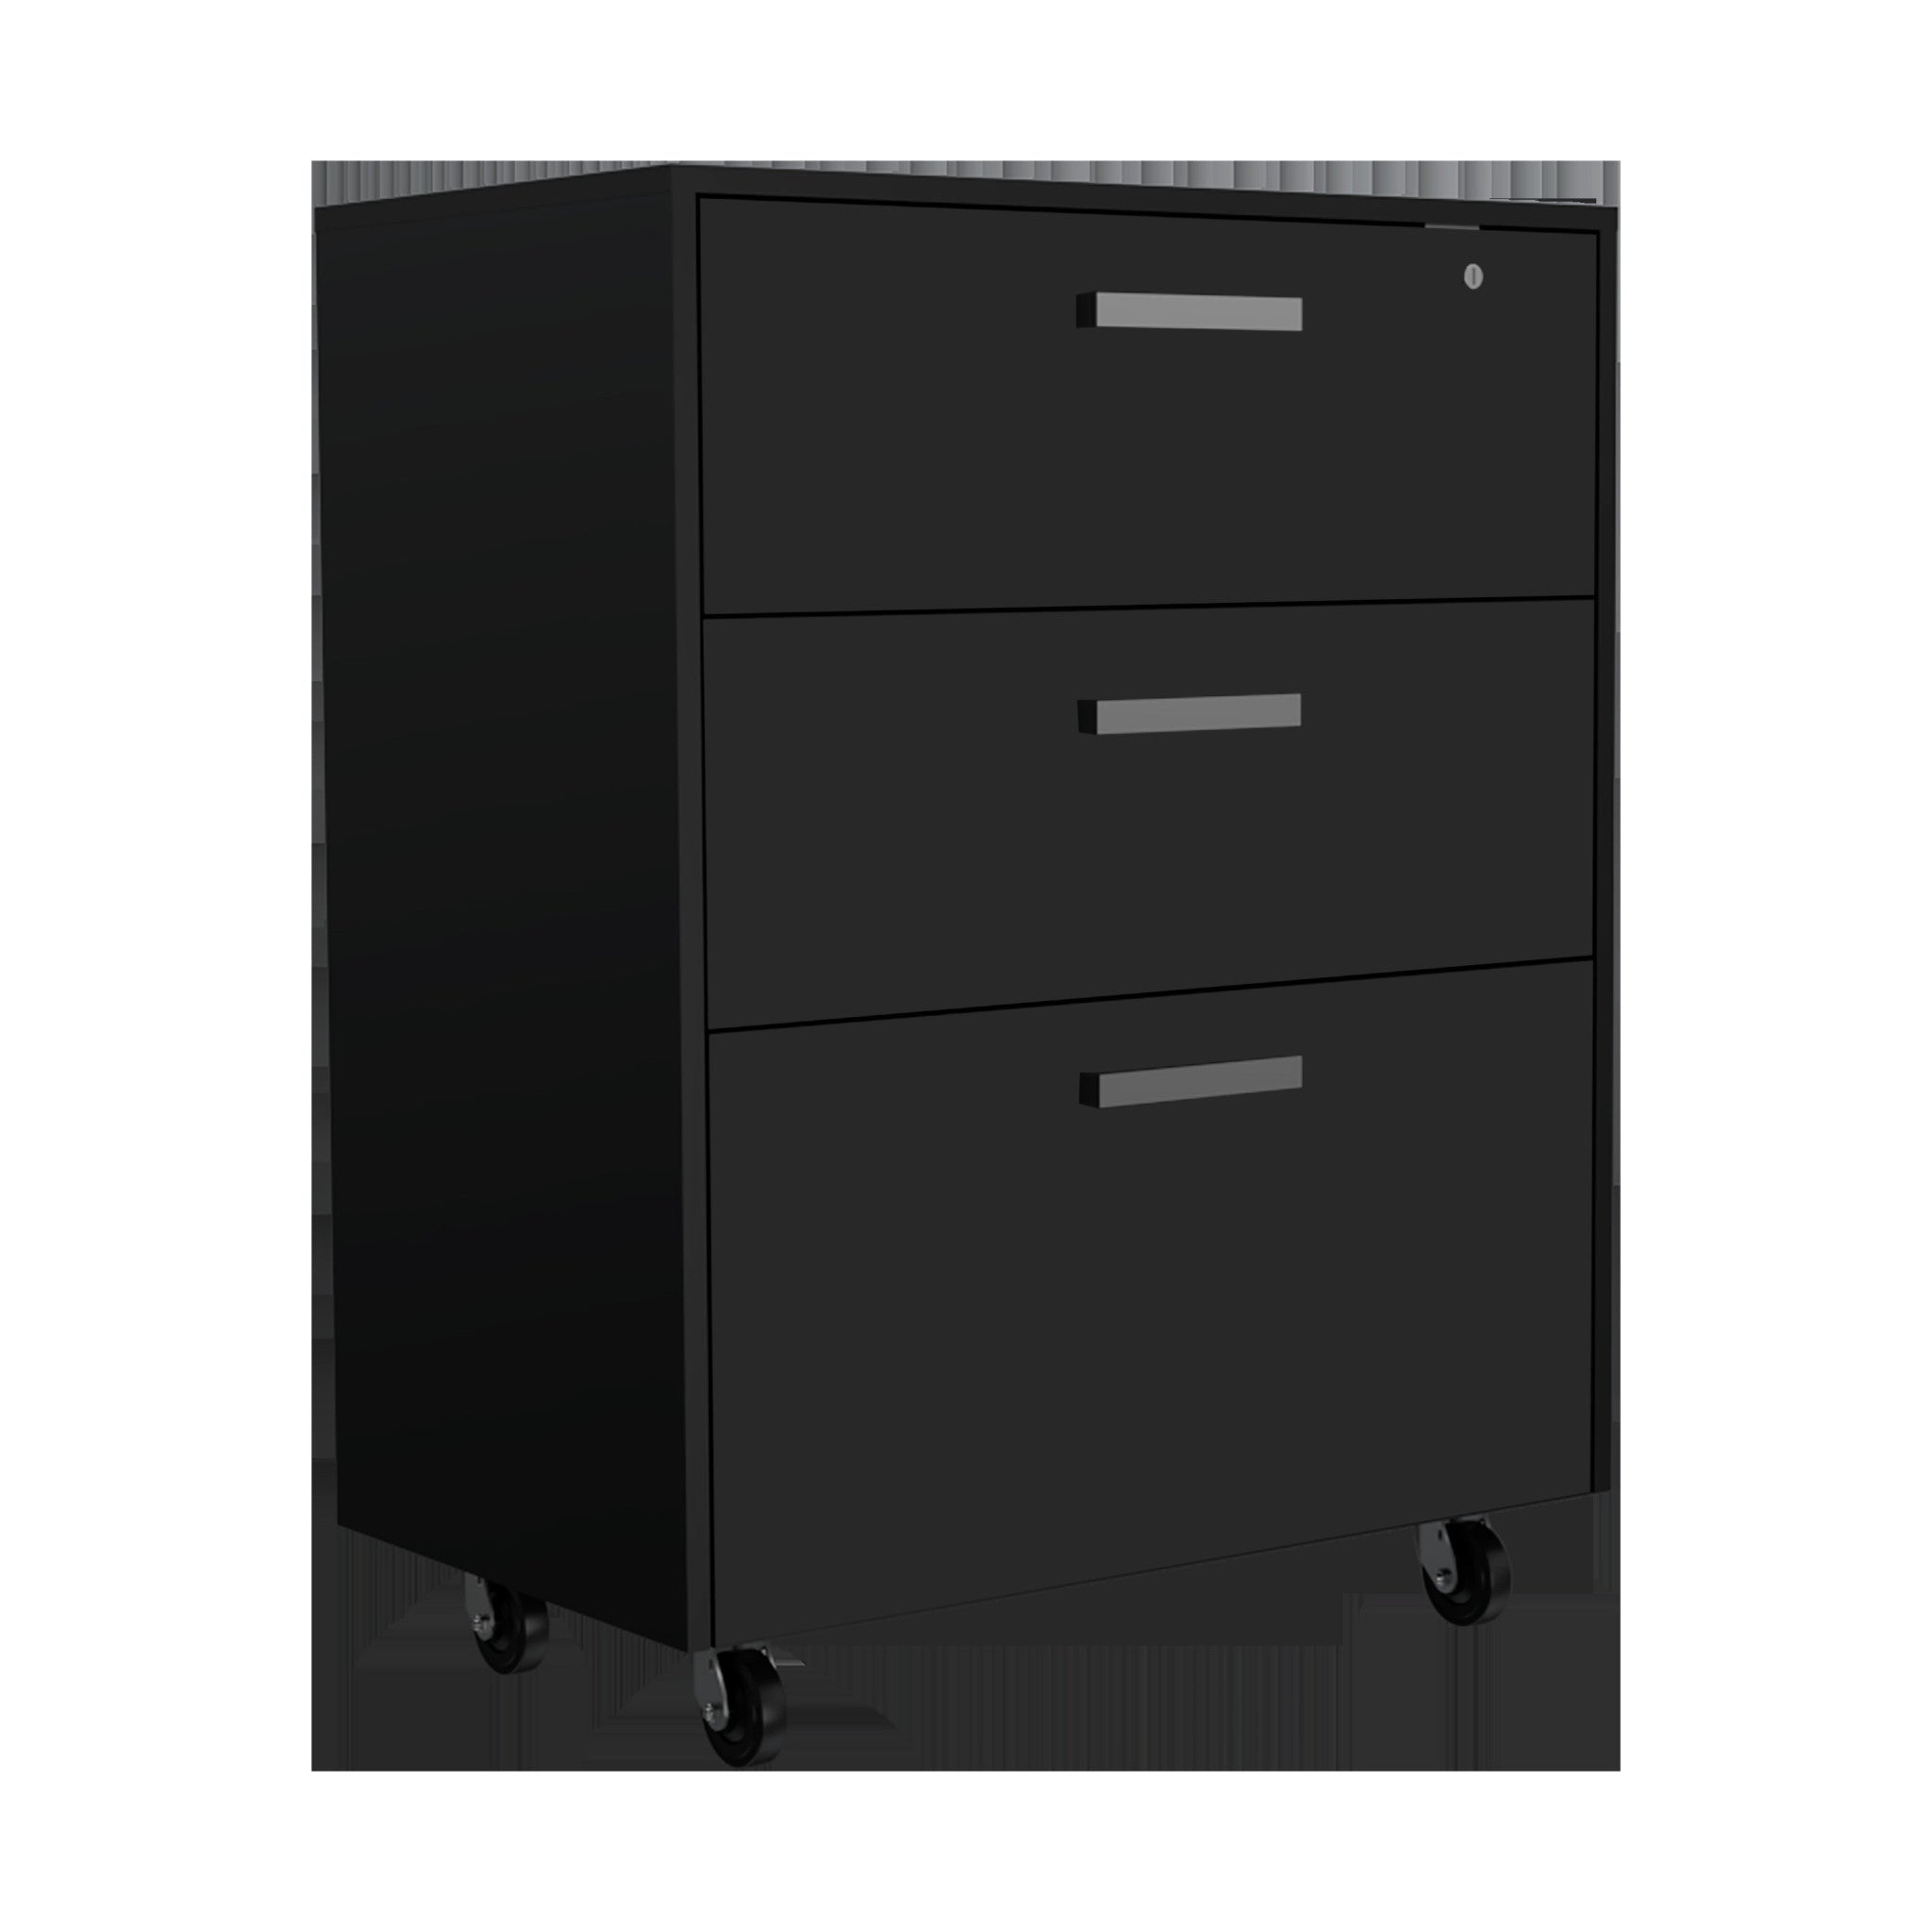 28" Black Wall mounted Accent Cabinet With Nine Shelves And Three Drawers